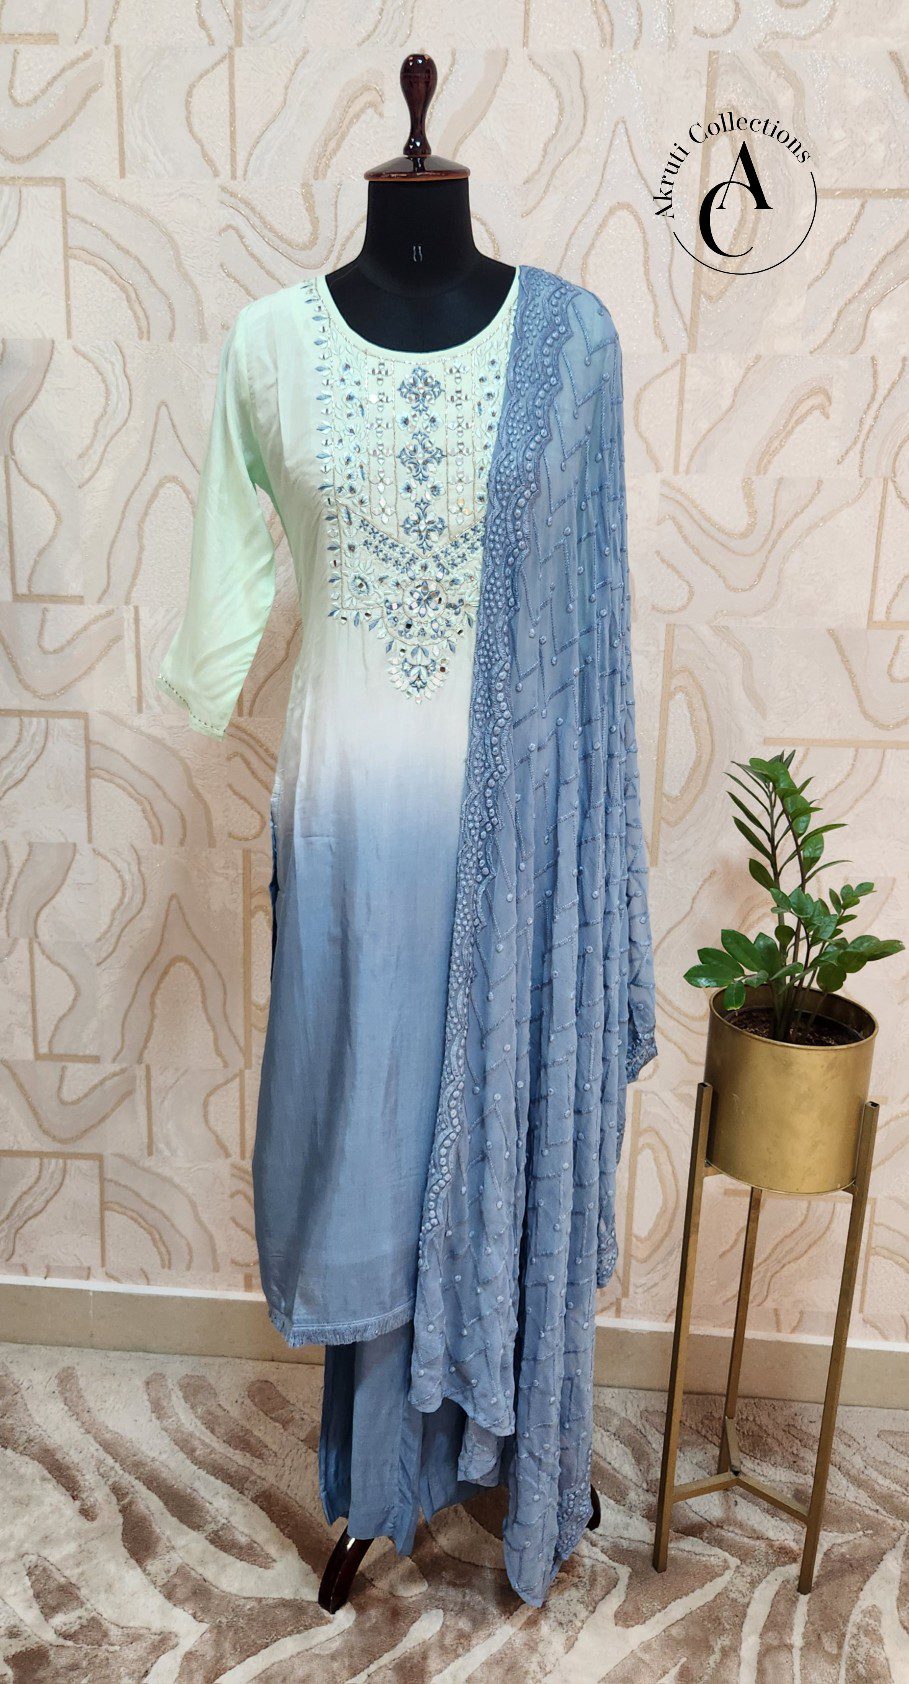 Twara White coat-type 3/4th sleeve cotton long kurti features blue color  intricate floral vine&thread&chamii embroidery